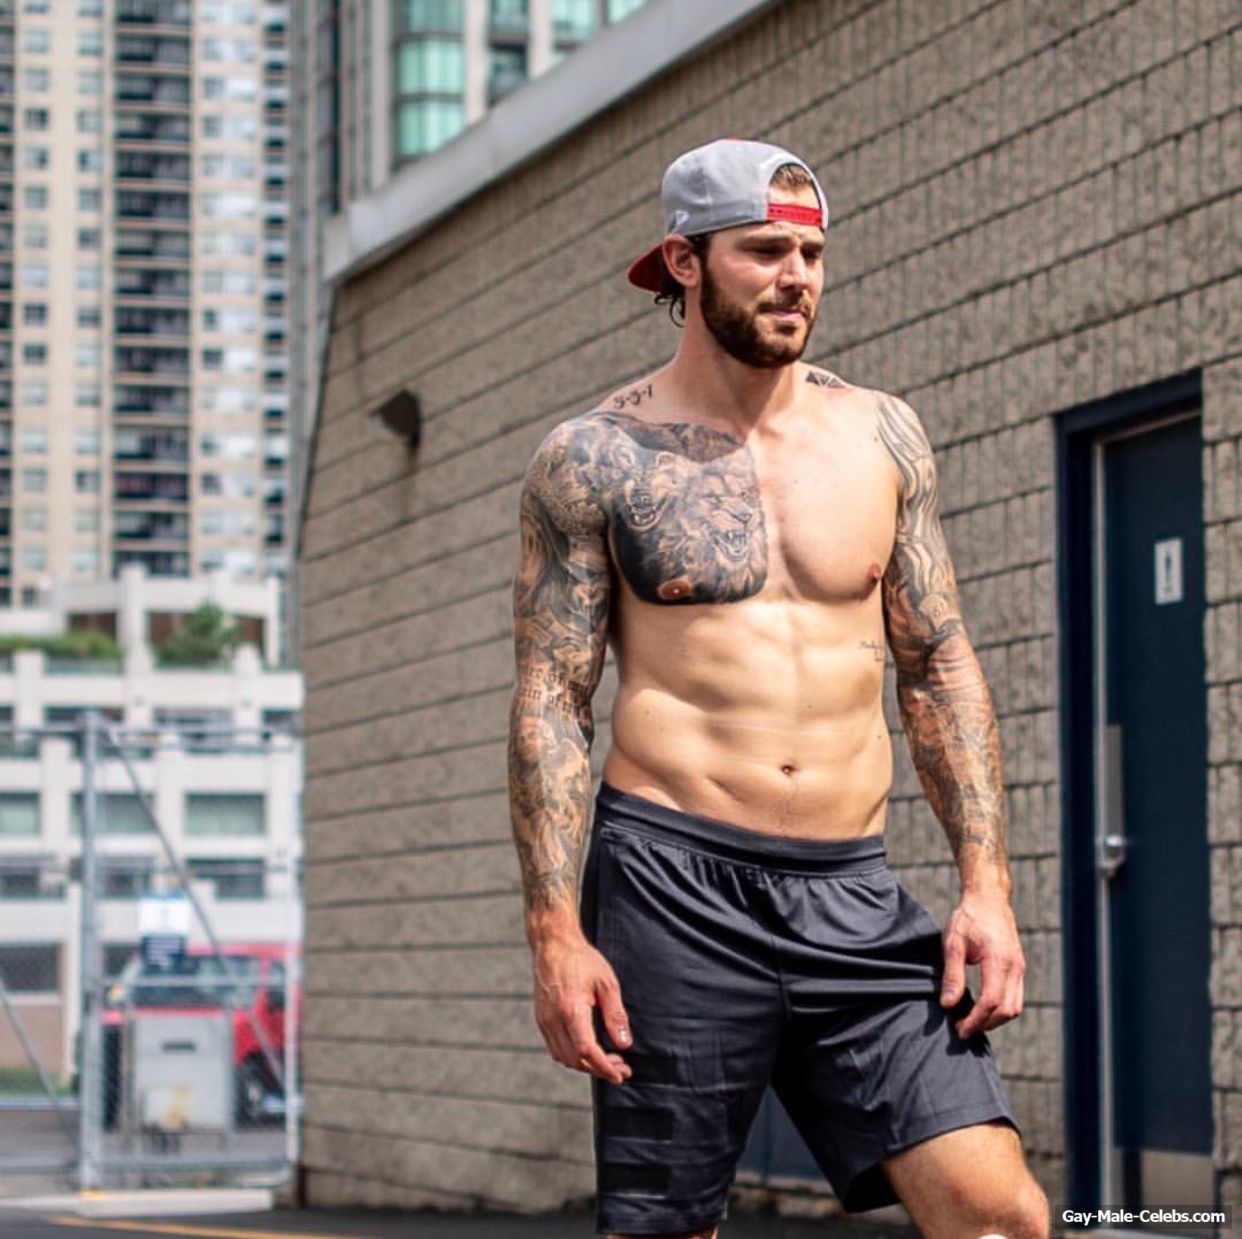 Tyler Seguin Nude And Sexy For ESPN Magazine